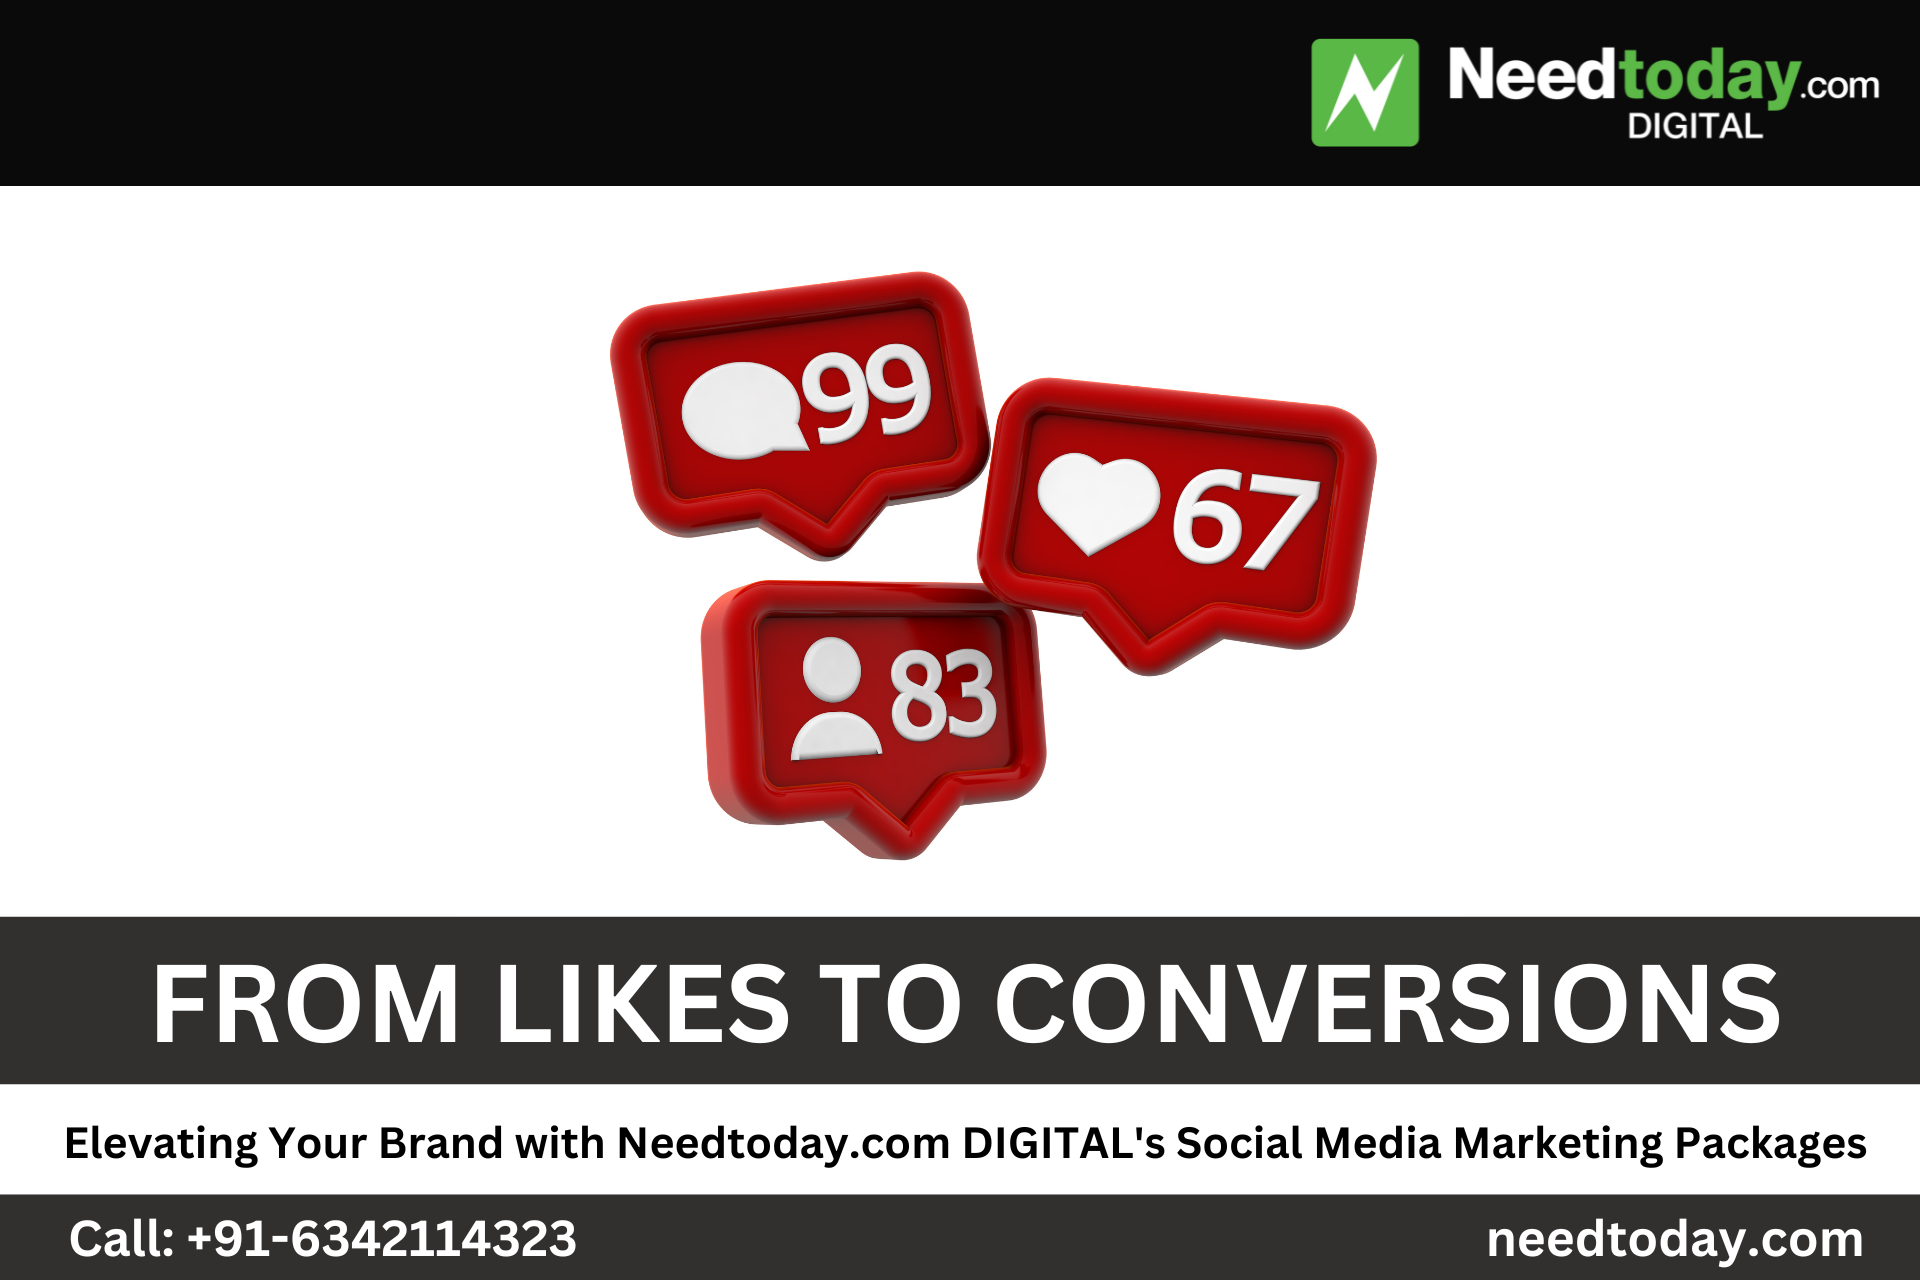 From Likes to Conversions: Elevating Your Brand with Needtoday.com DIGITAL's Social Media Marketing Packages